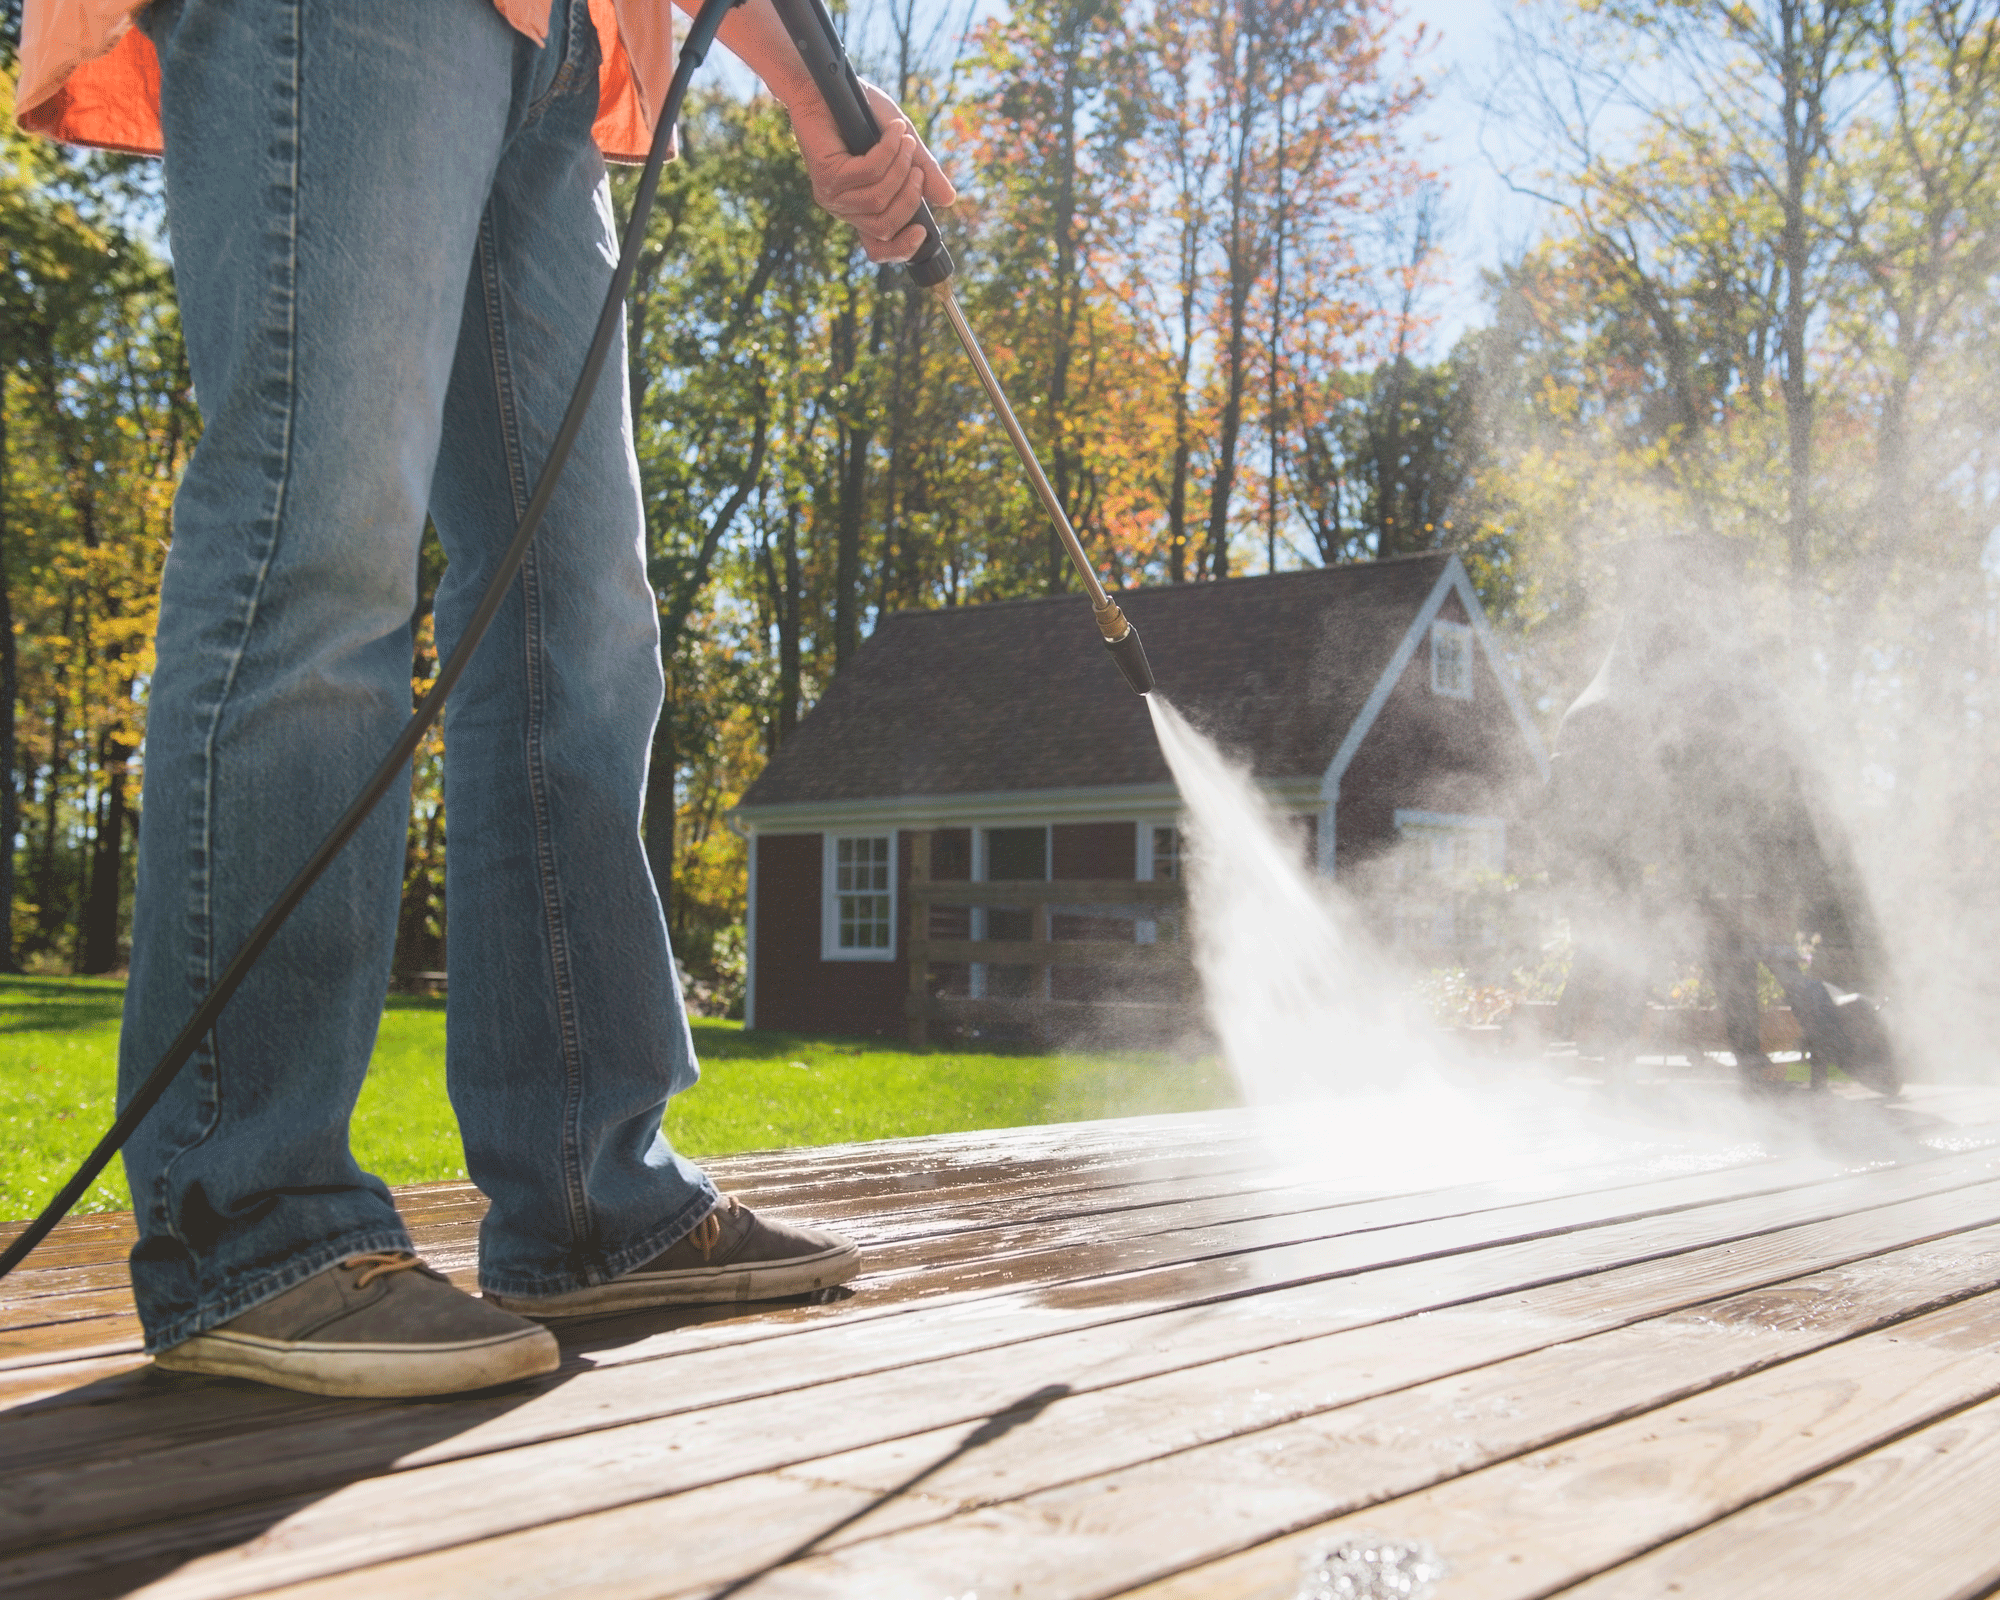 pressure washer used on decking